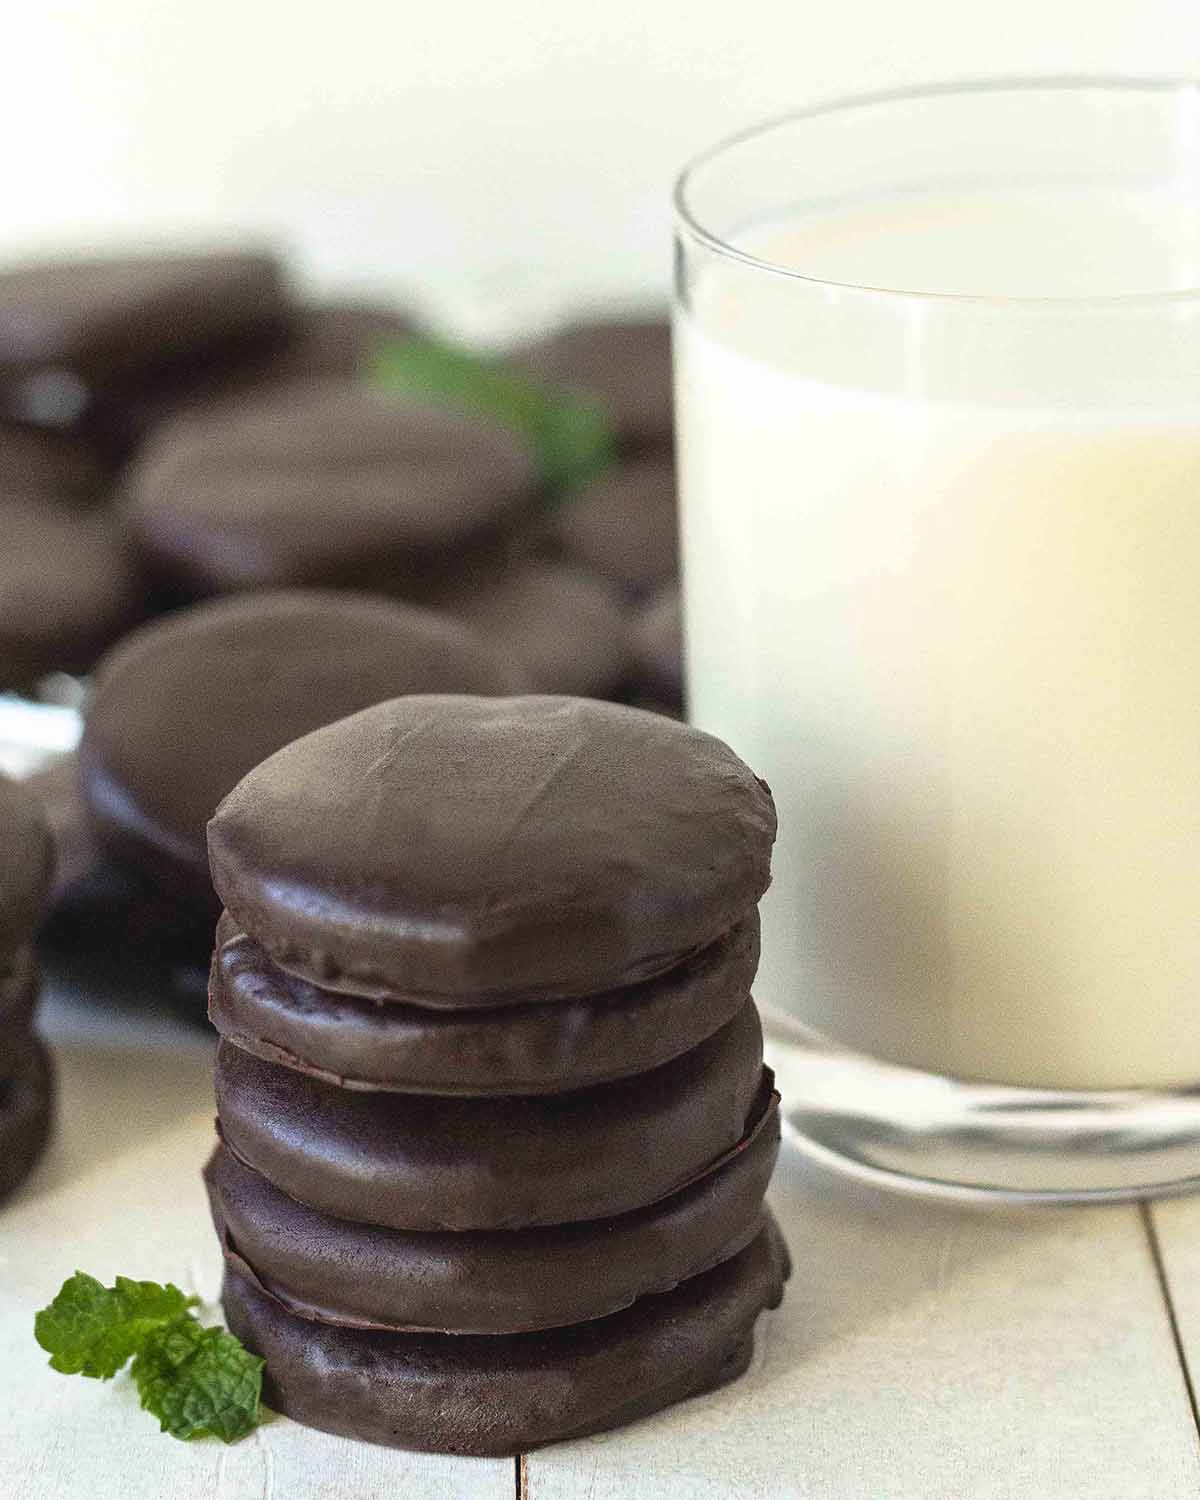 A stack of 5 chocolate mint dipped cookies sitting on a white table. More cookies and a glass of milk sit behind the cookies.